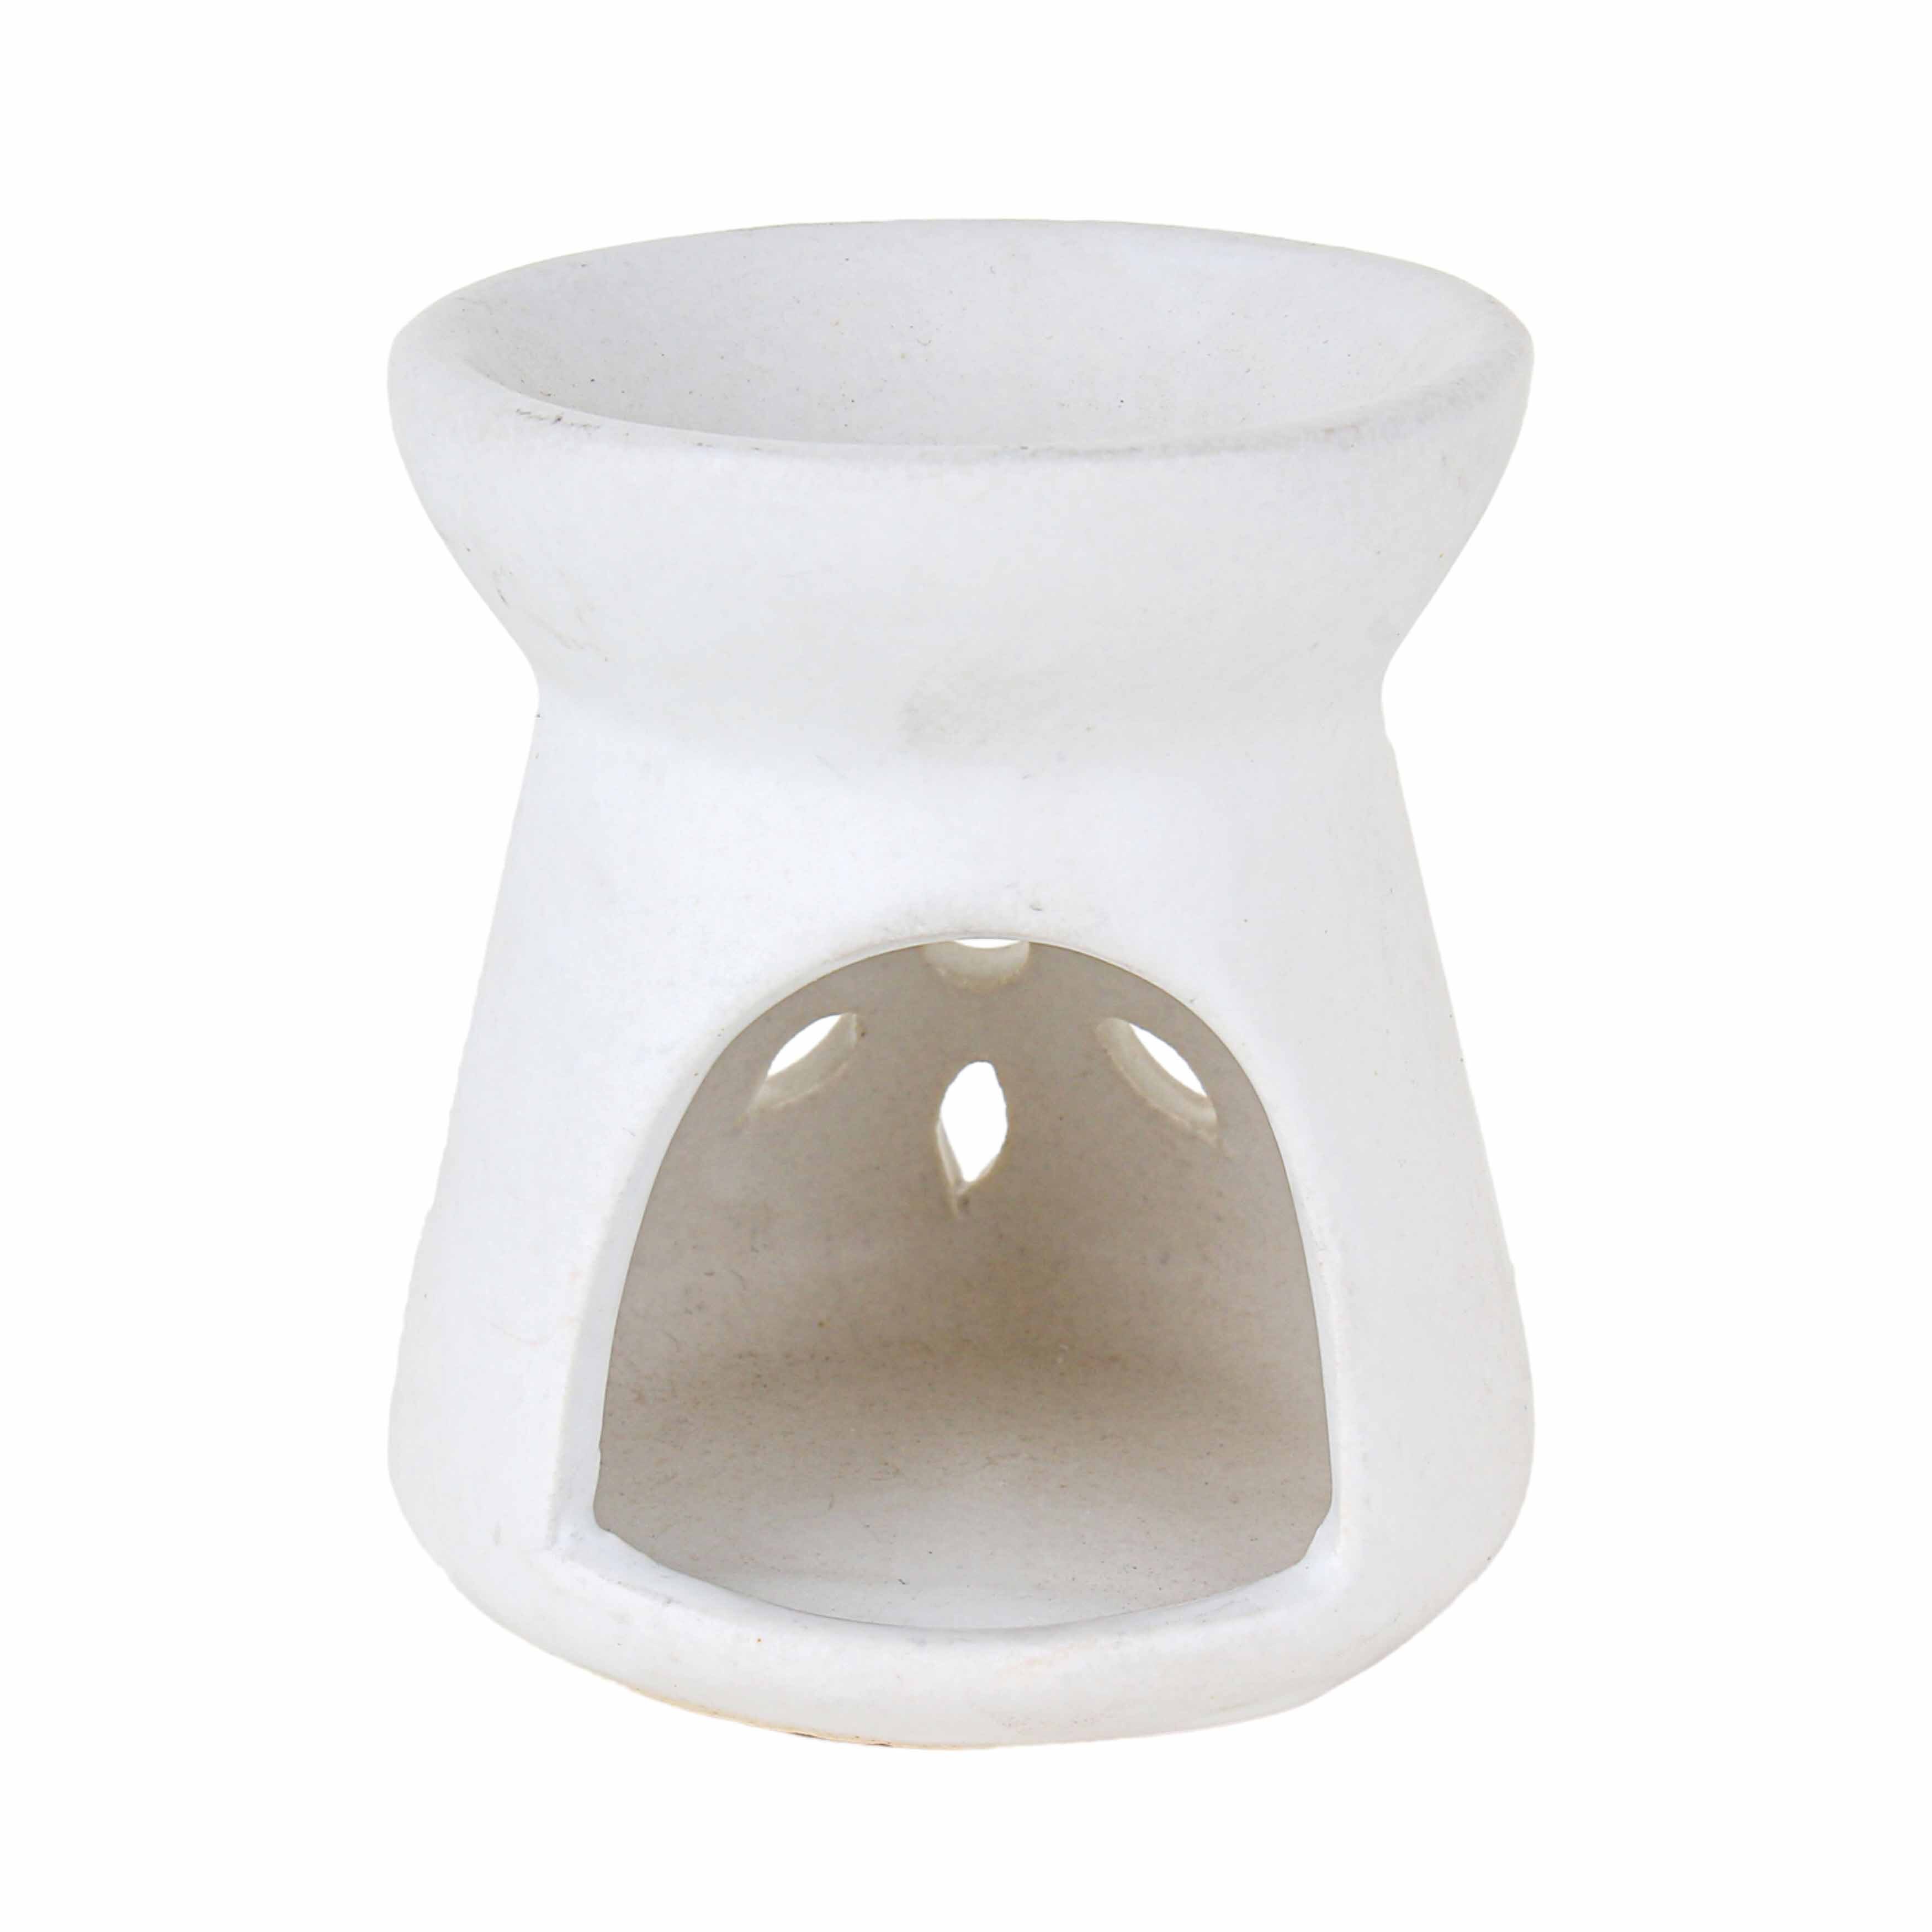 Asian Aura Ceramic Aromatic Oil Diffuser with 2 oil bottles AA-CB-00431 W